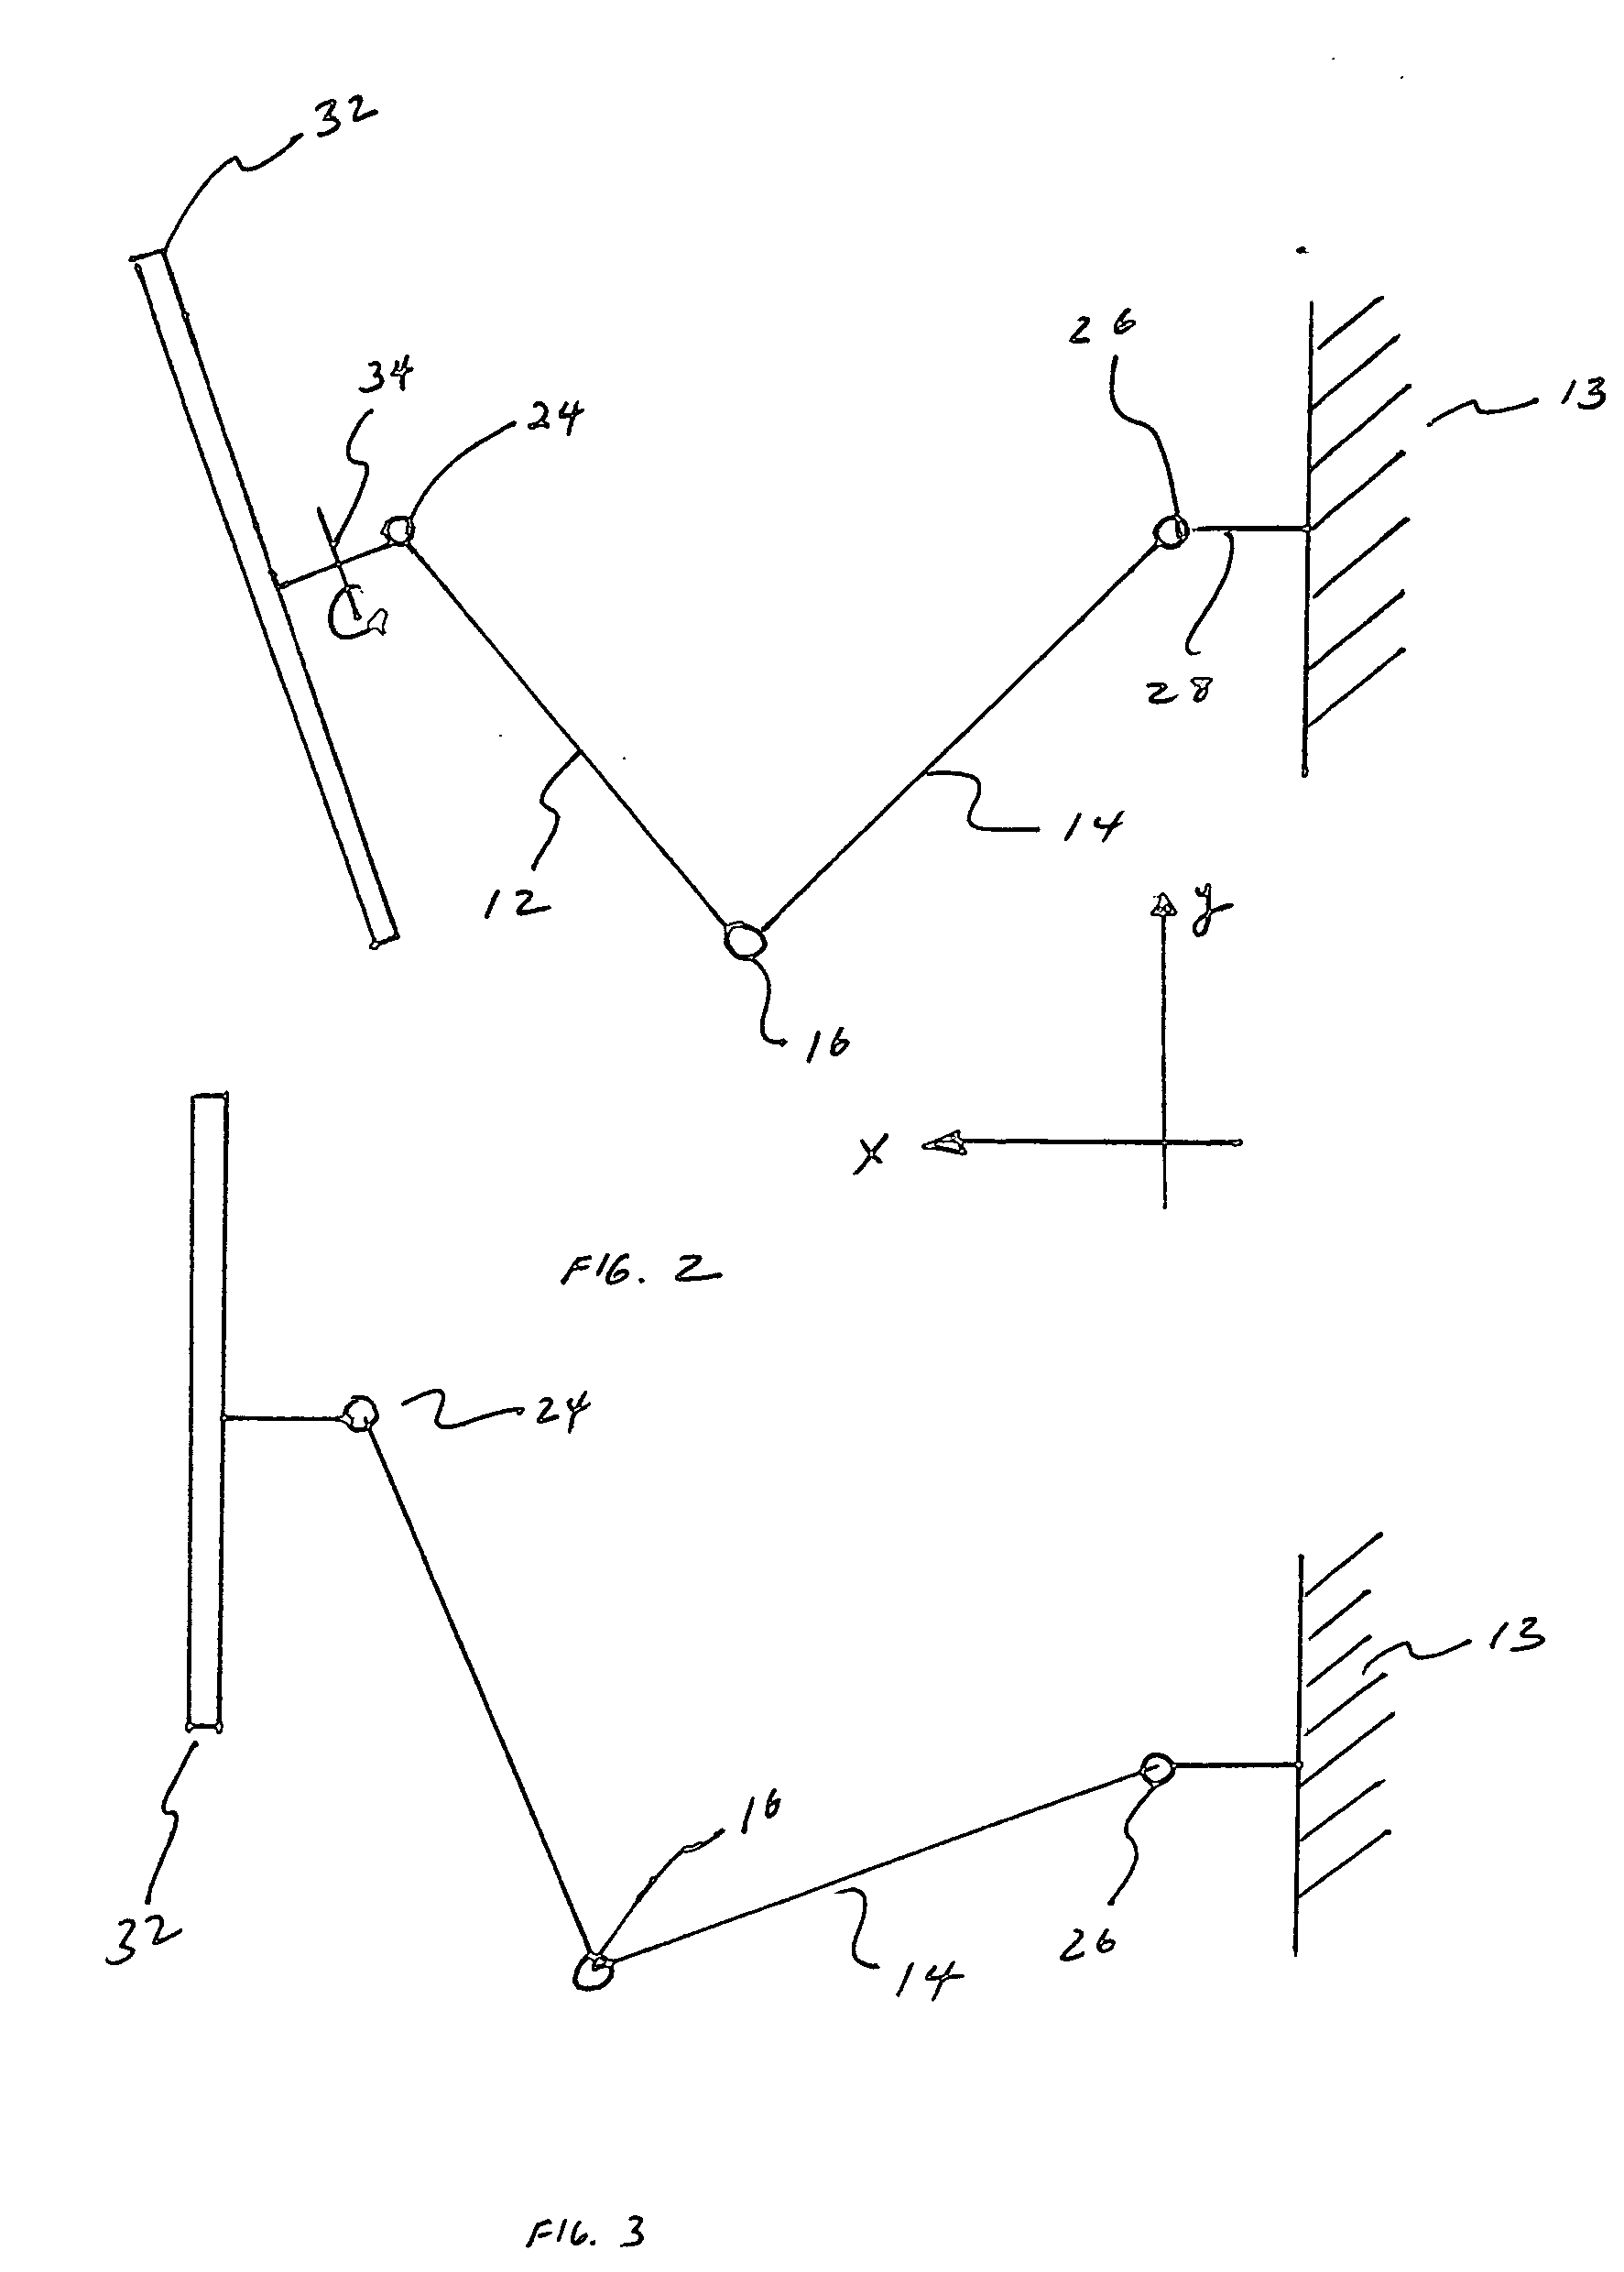 Viewing angle adjustment system for a monitor